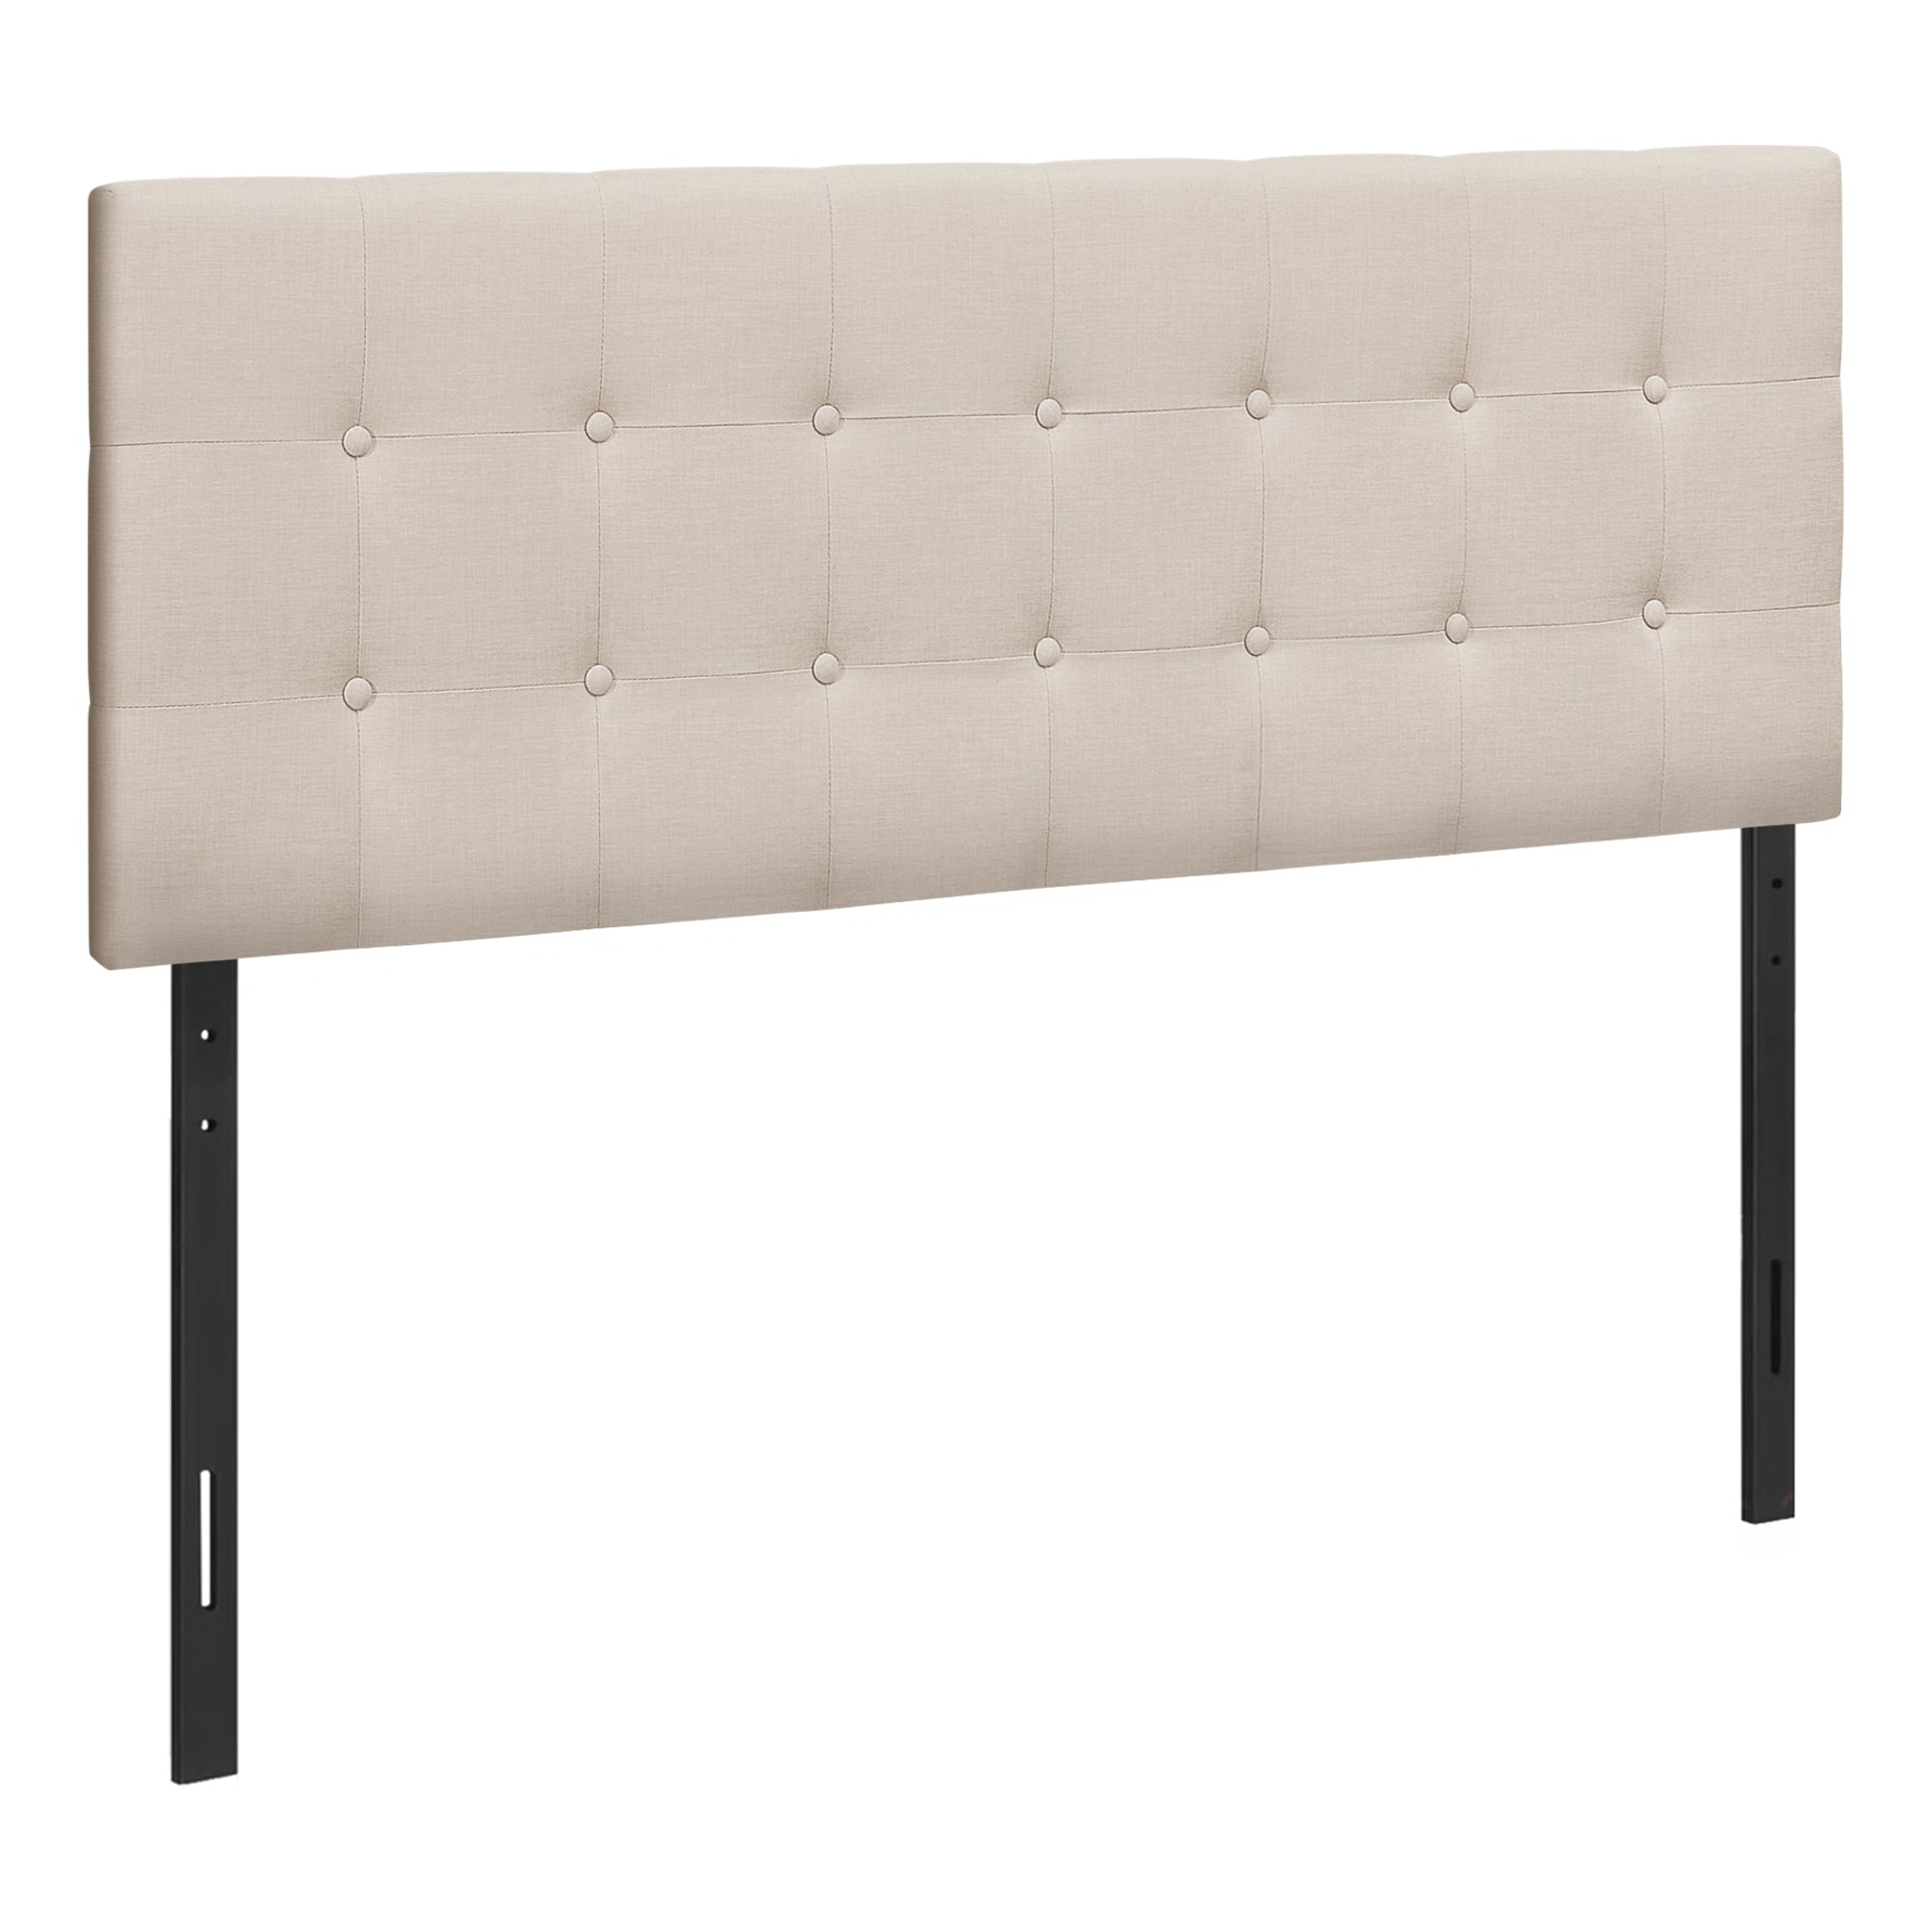 MN-456004Q    Headboard, Bedroom, Queen Size, Upholstered, Leather Look, Wooden Frame, Beige, Black, Contemporary, Modern